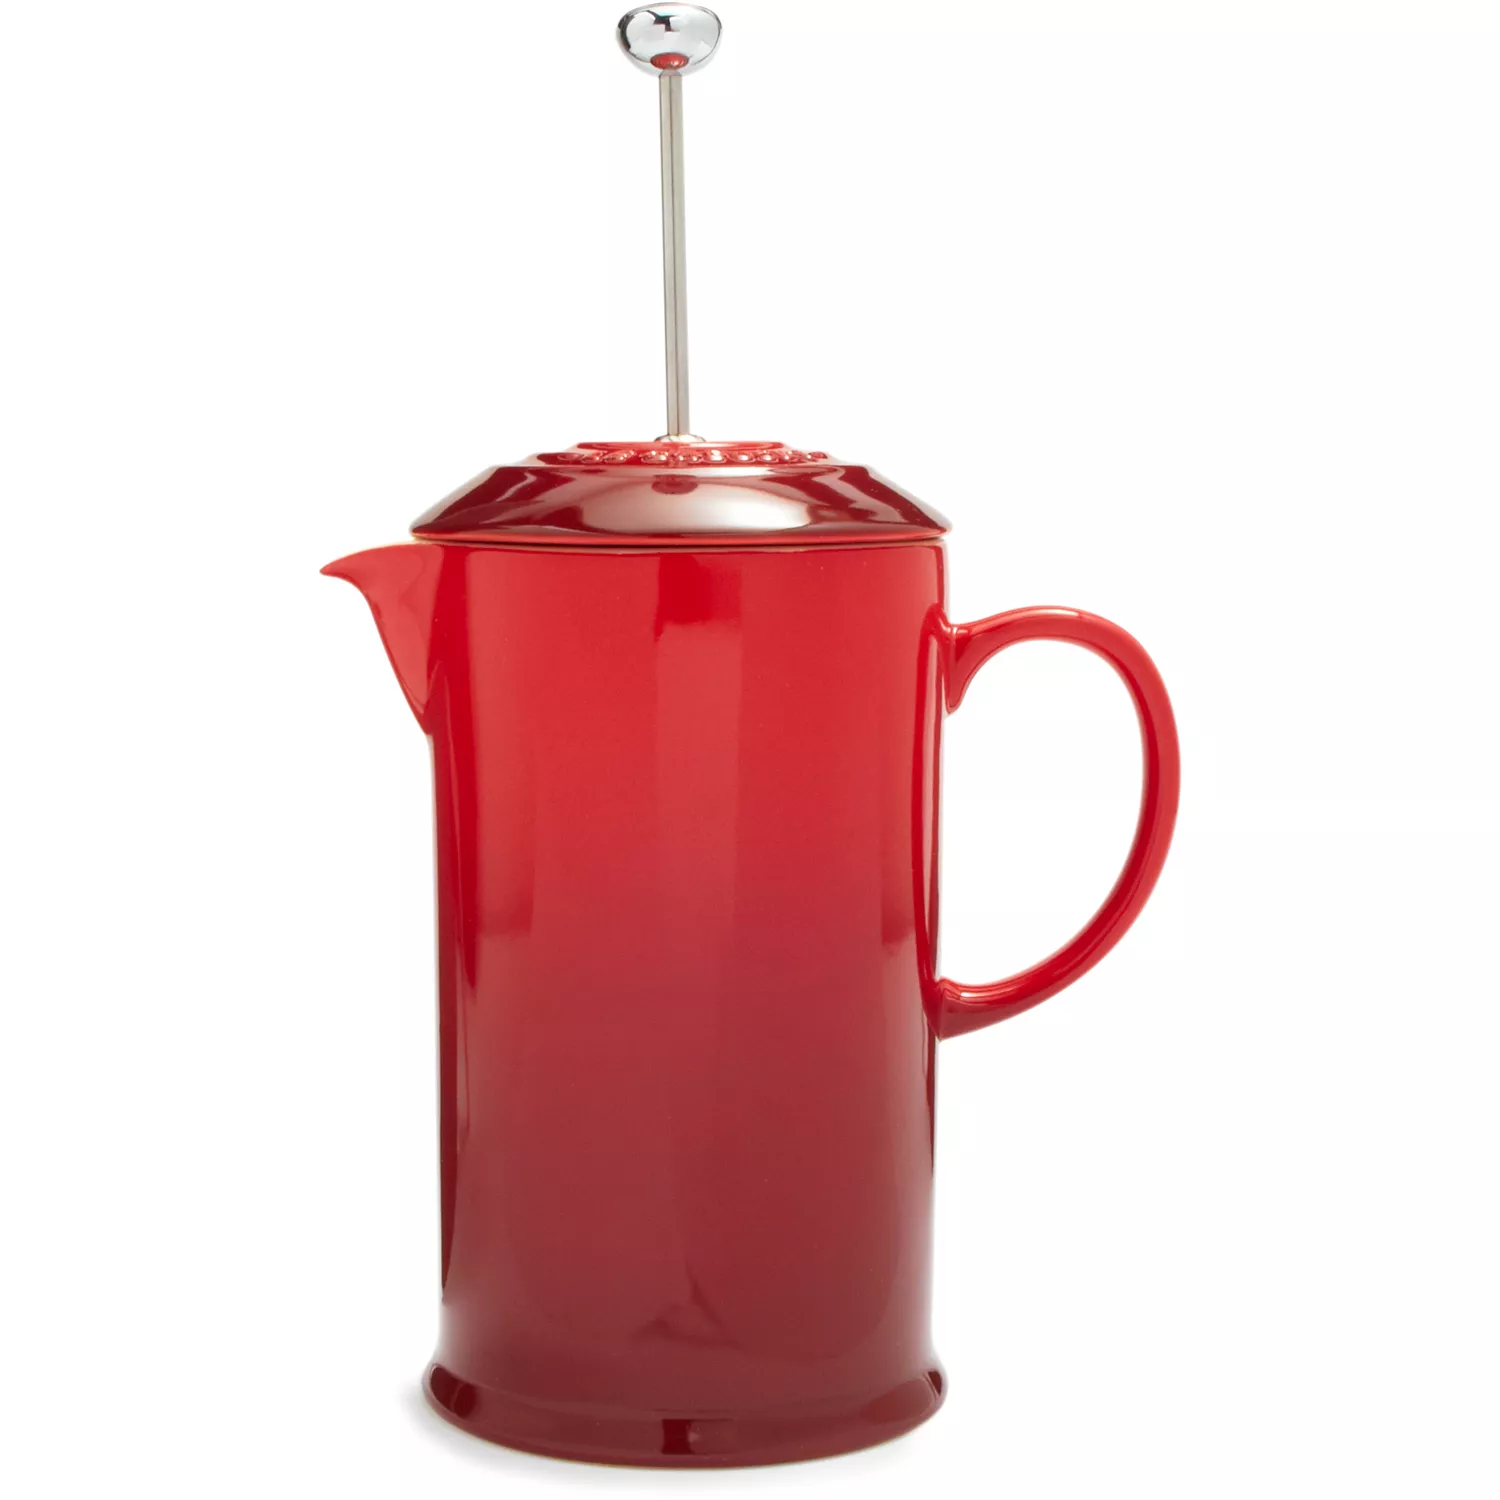 Le Creuset Stoneware French Press Red